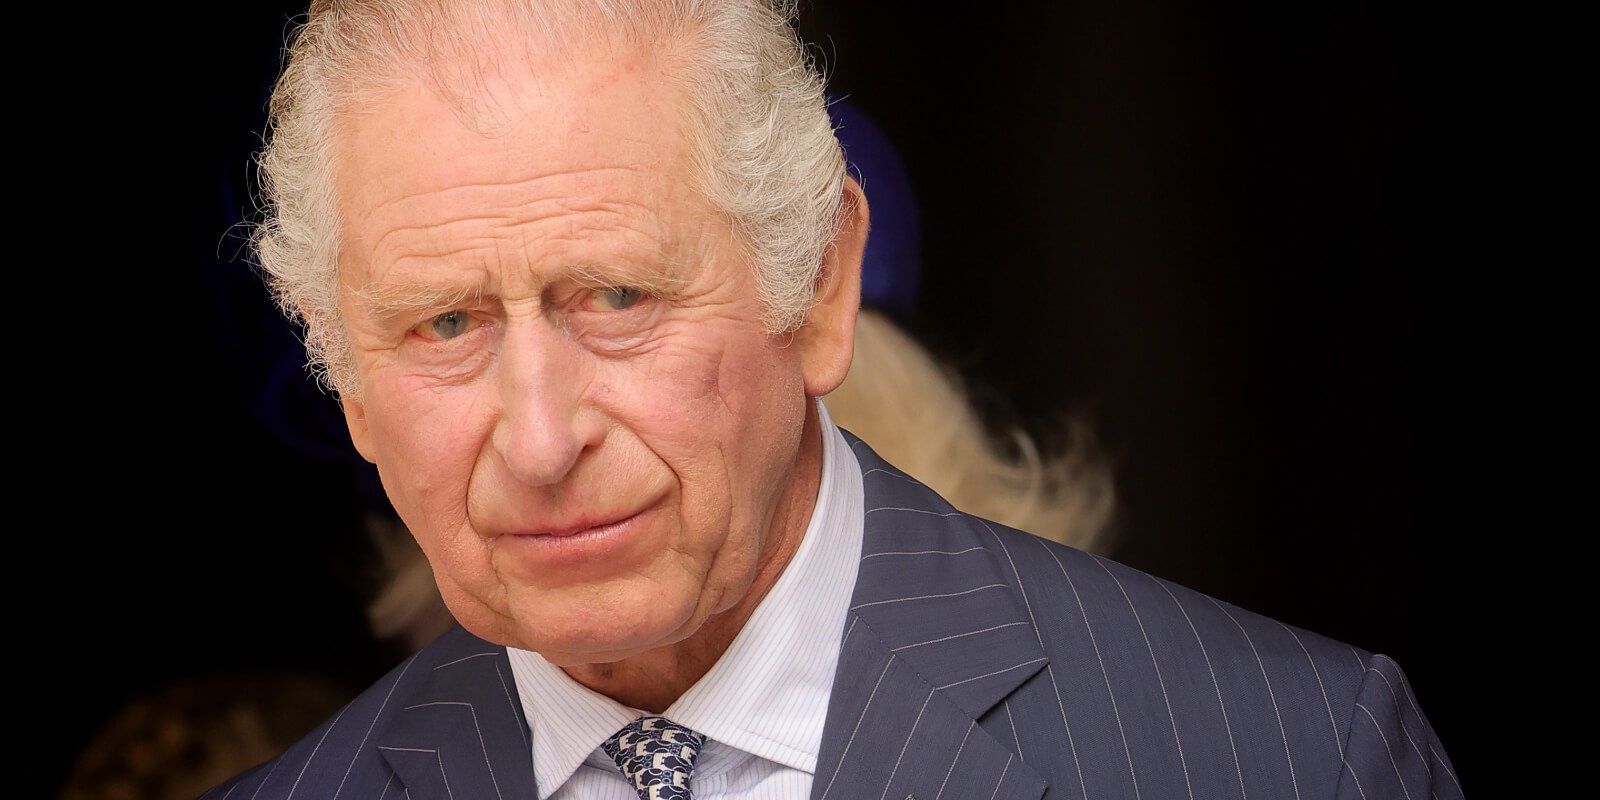 King Charles III plans on streamlining the monarchy, wants some royals to 'fund themselves.'